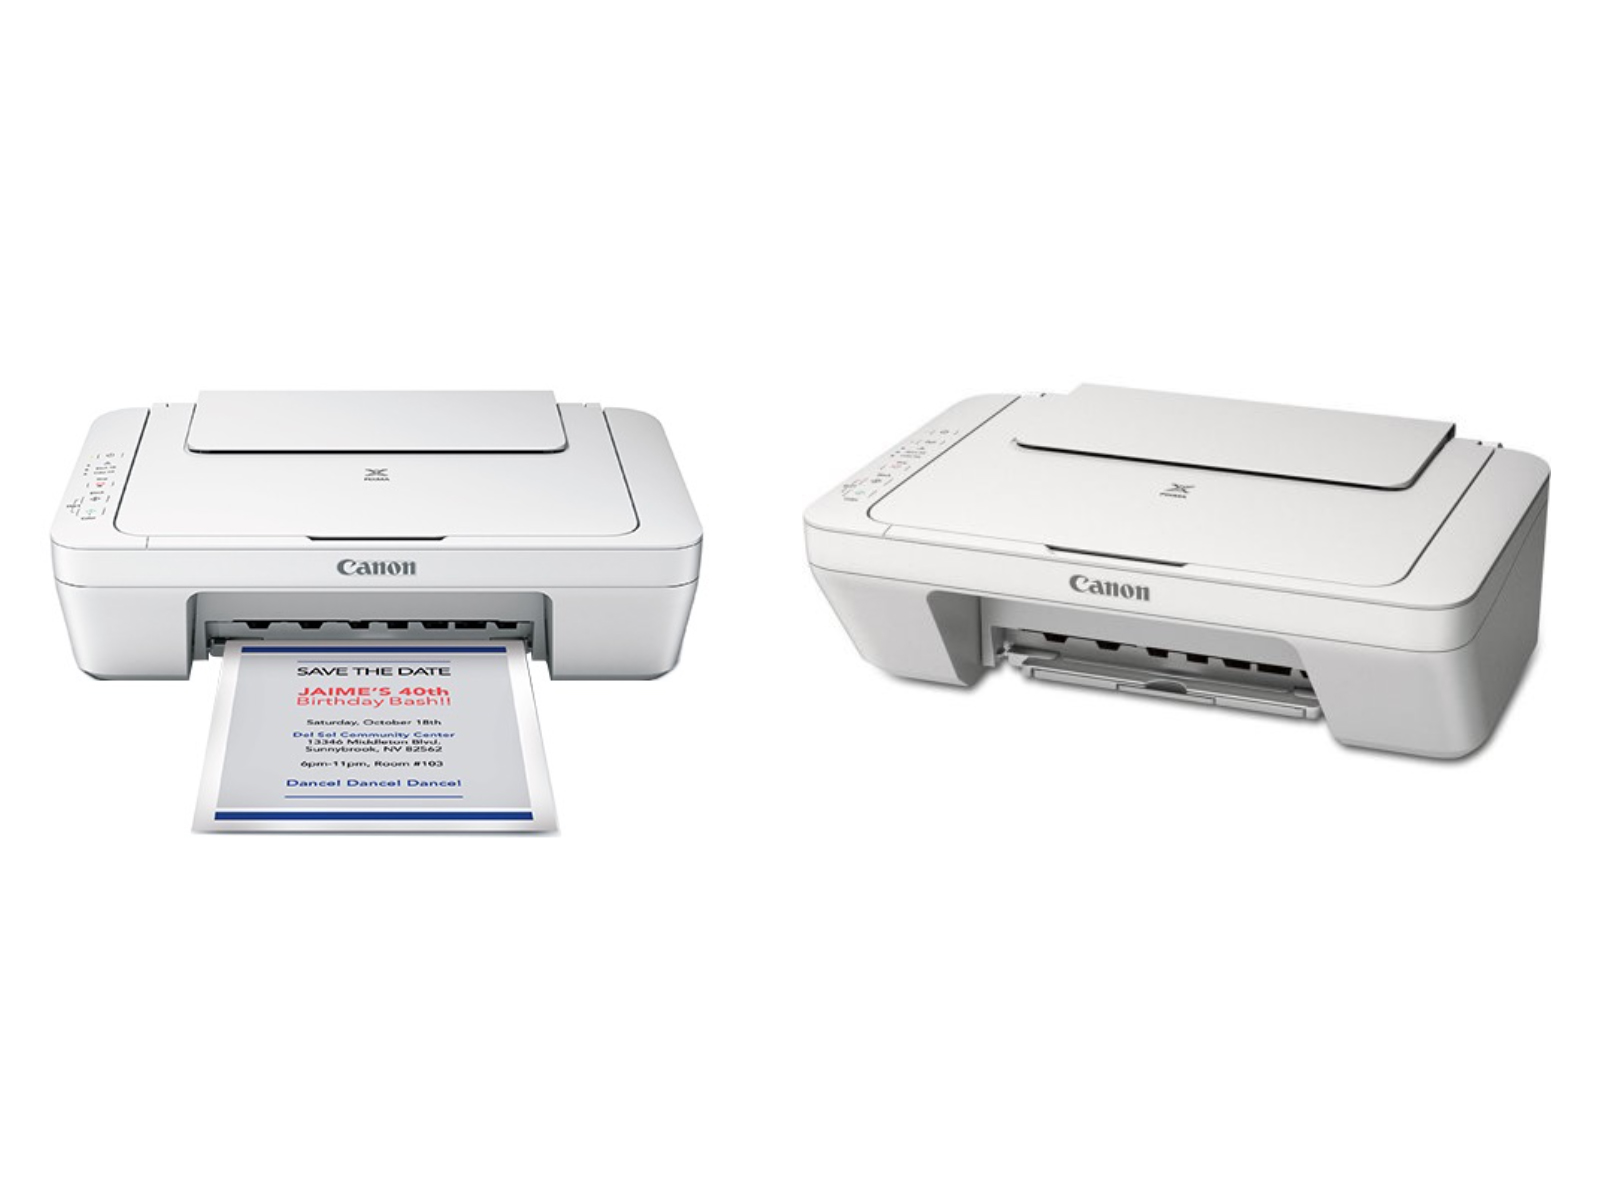 best printer for mac college student